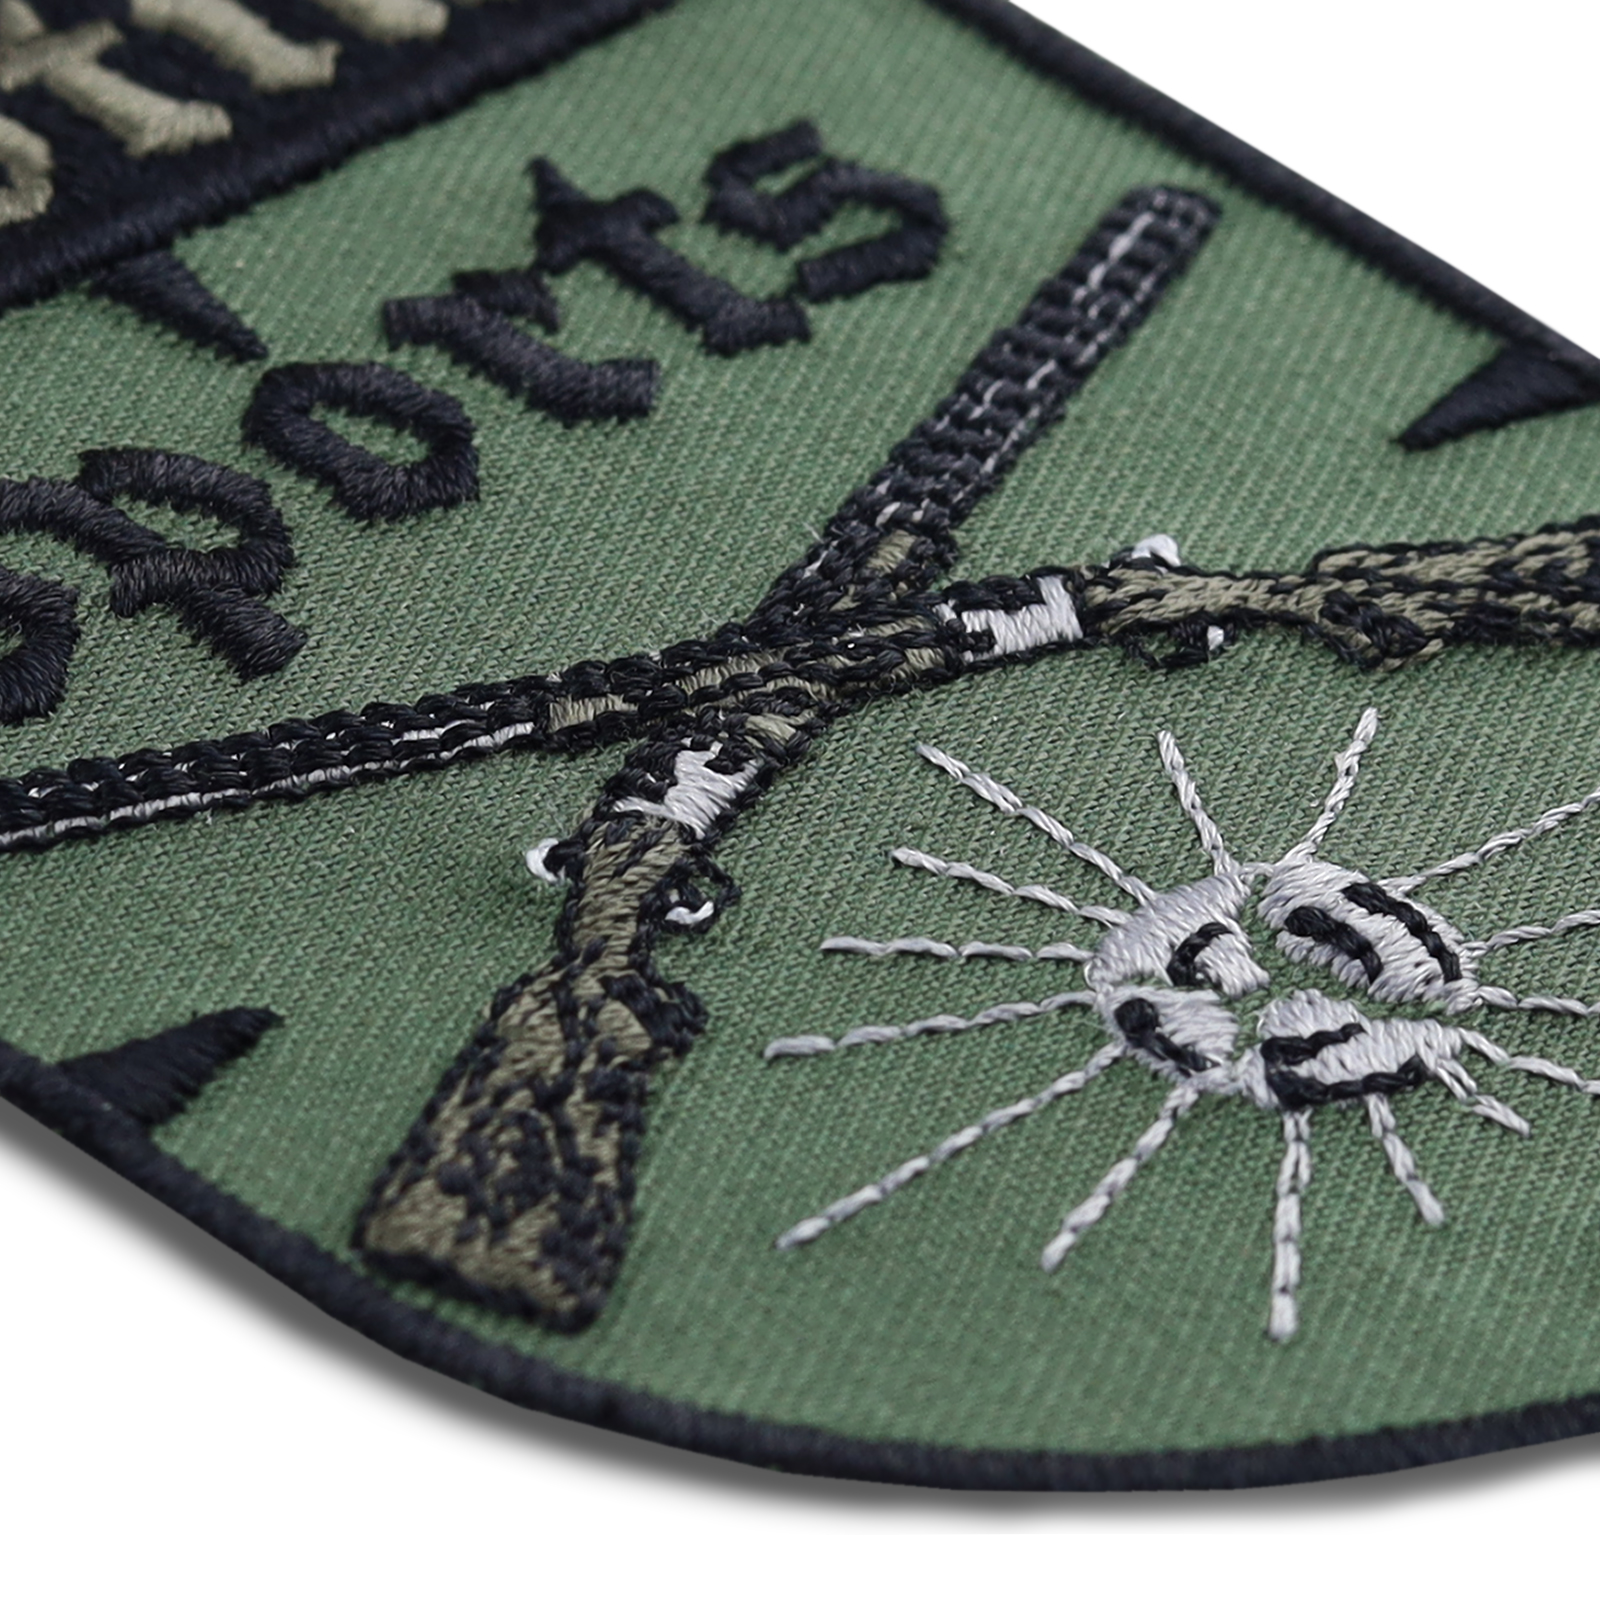 Shooting sports - Patch